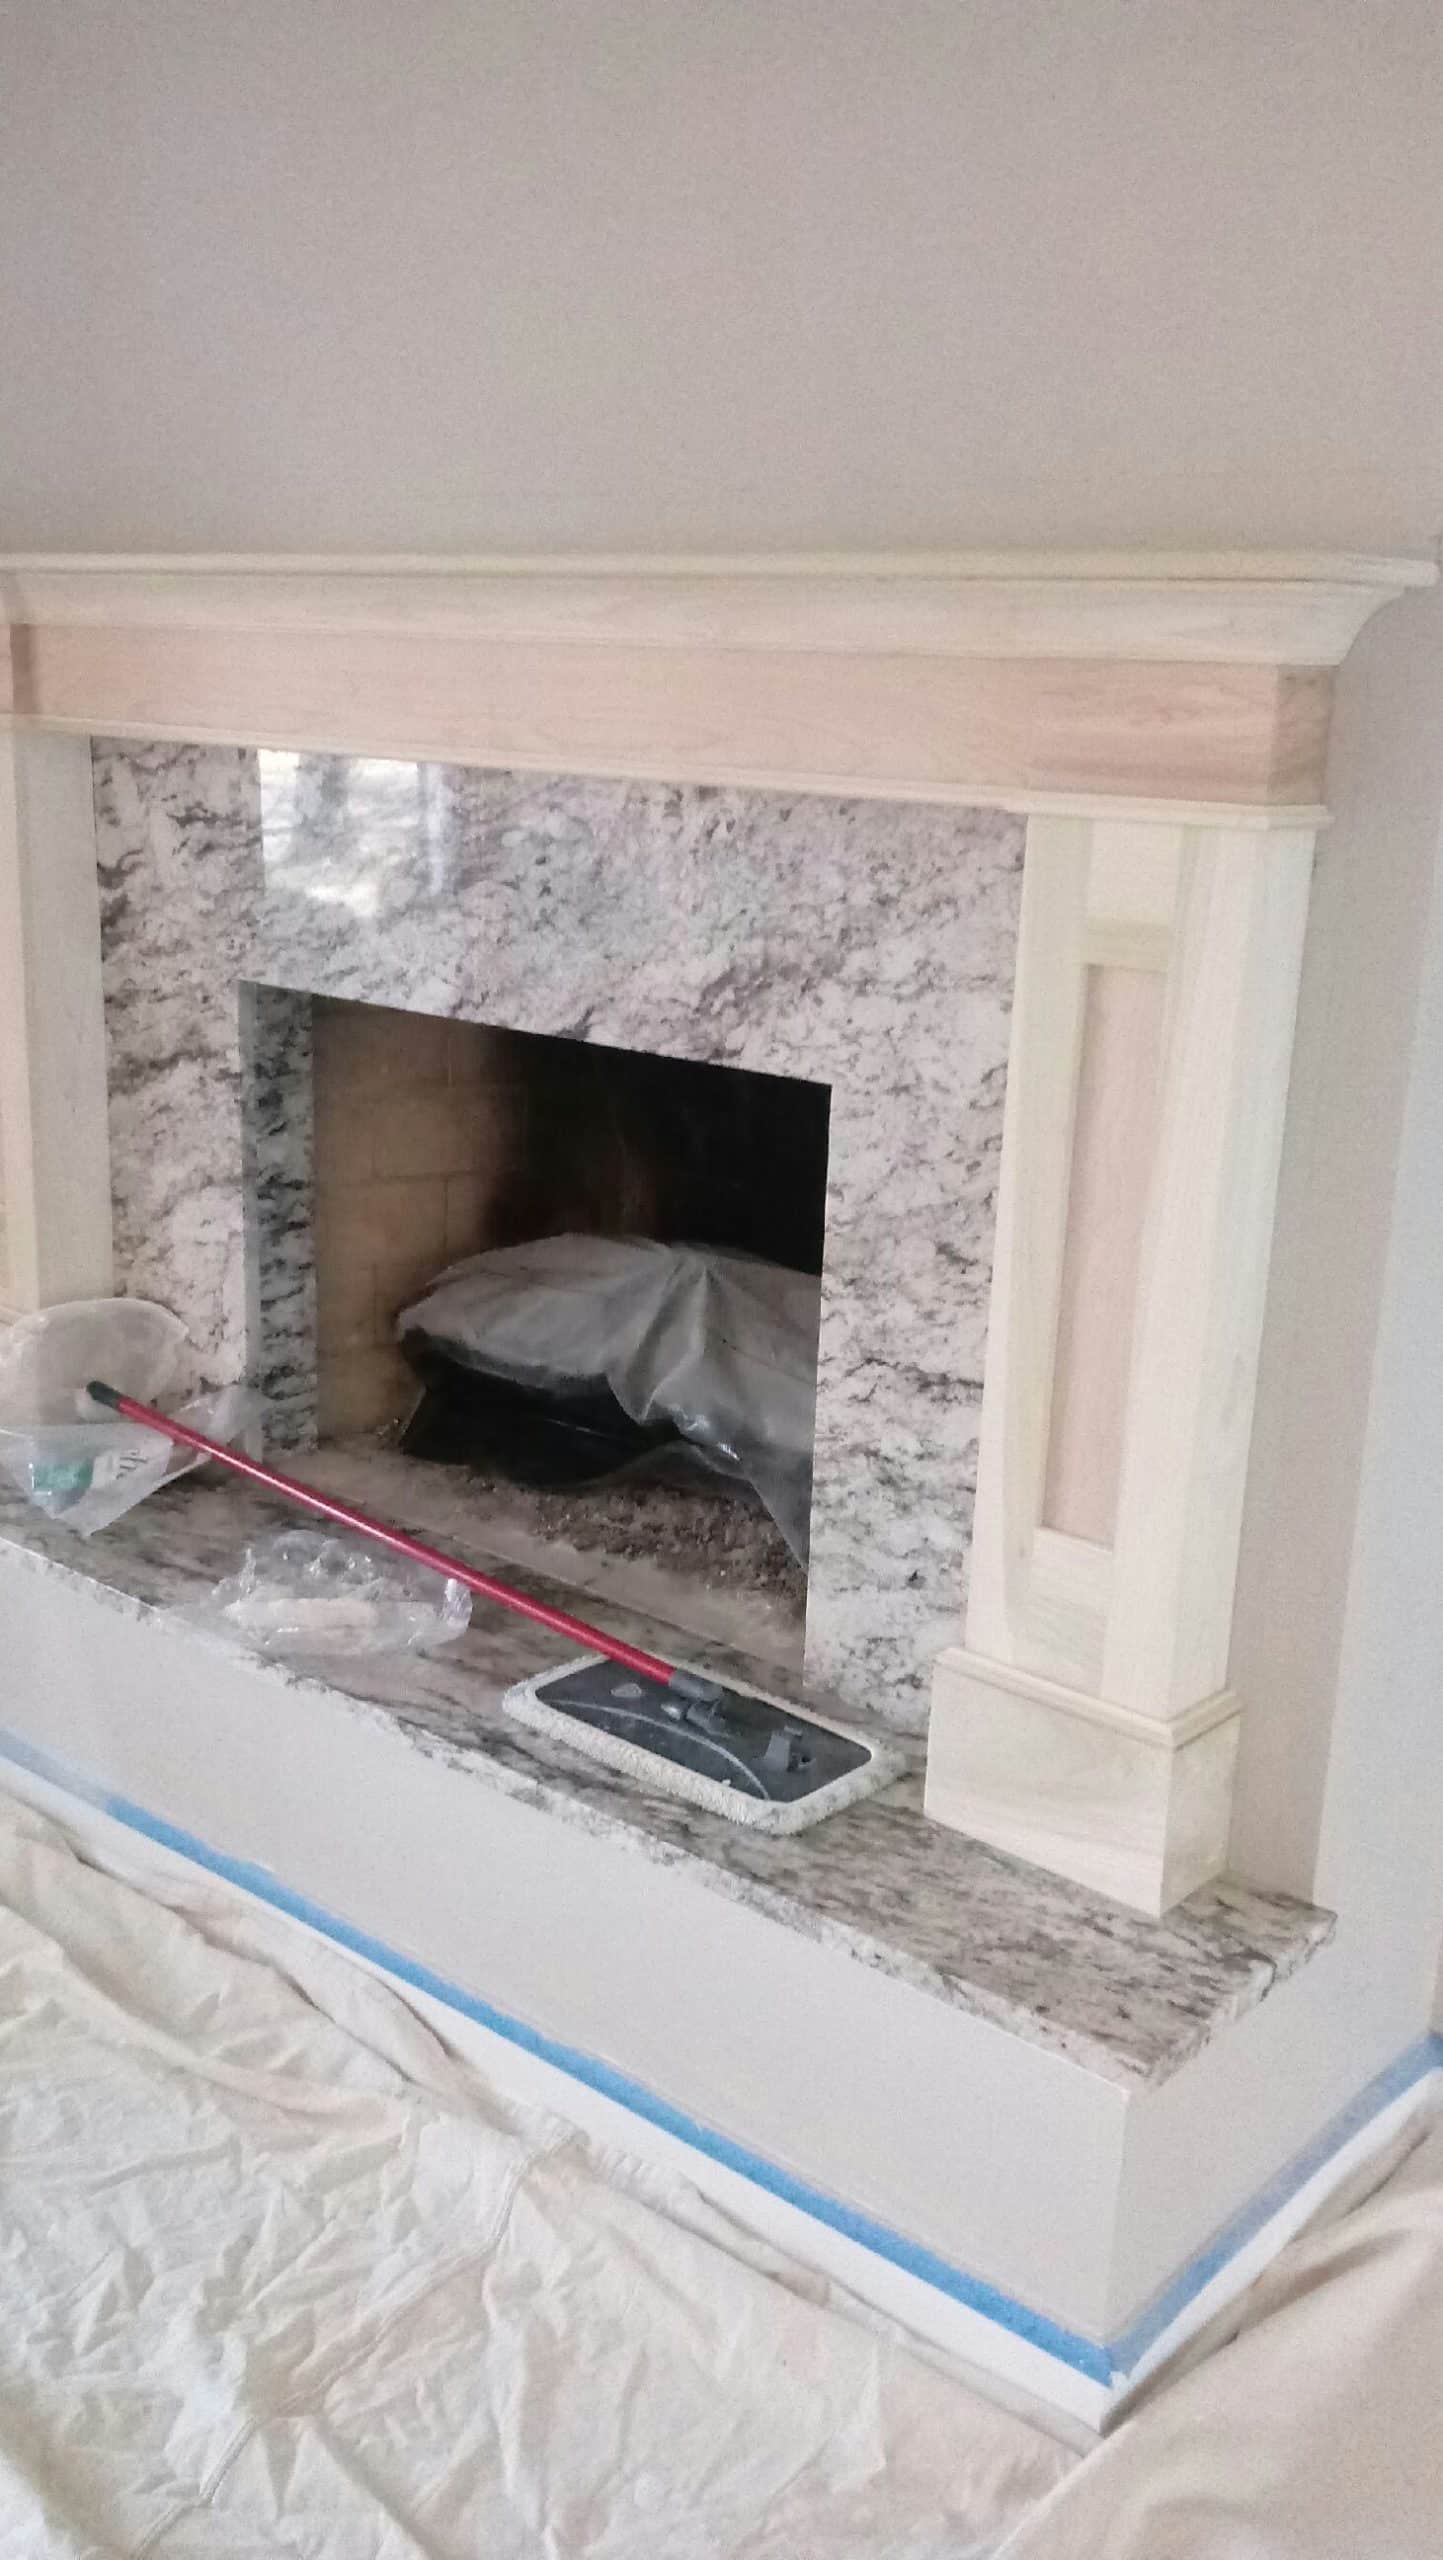 Marble fireplace with a mop on it